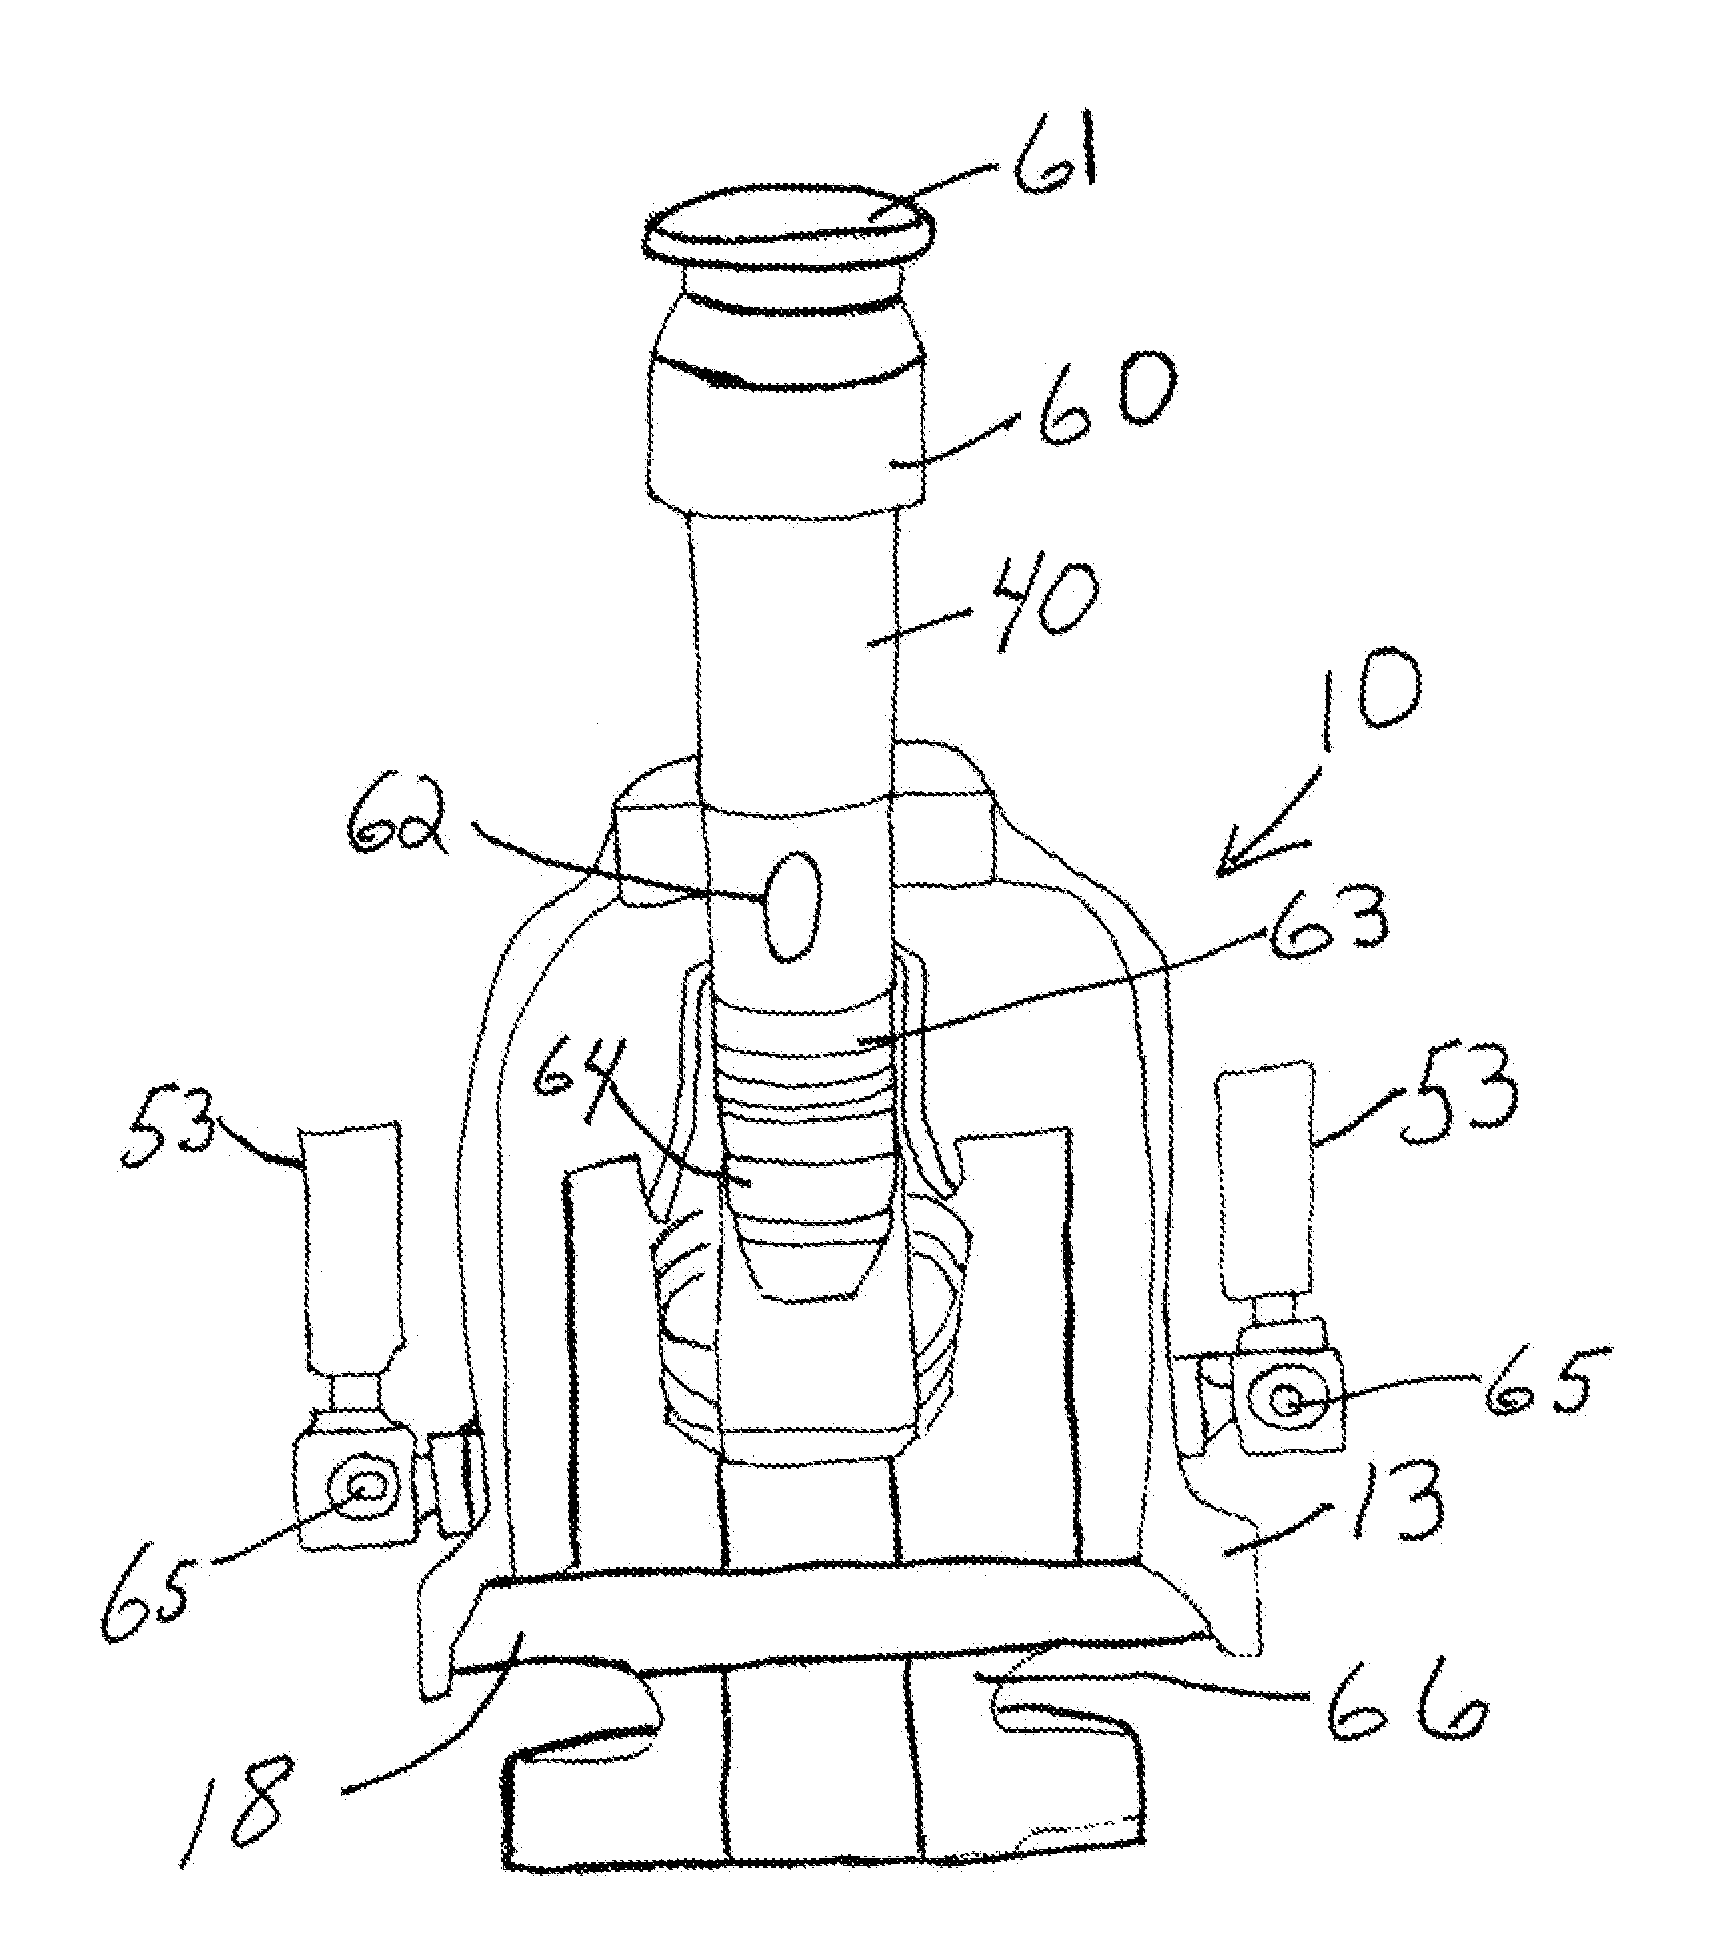 Apparatus and method for isolating and securing an underwater oil wellhead and blowout preventer